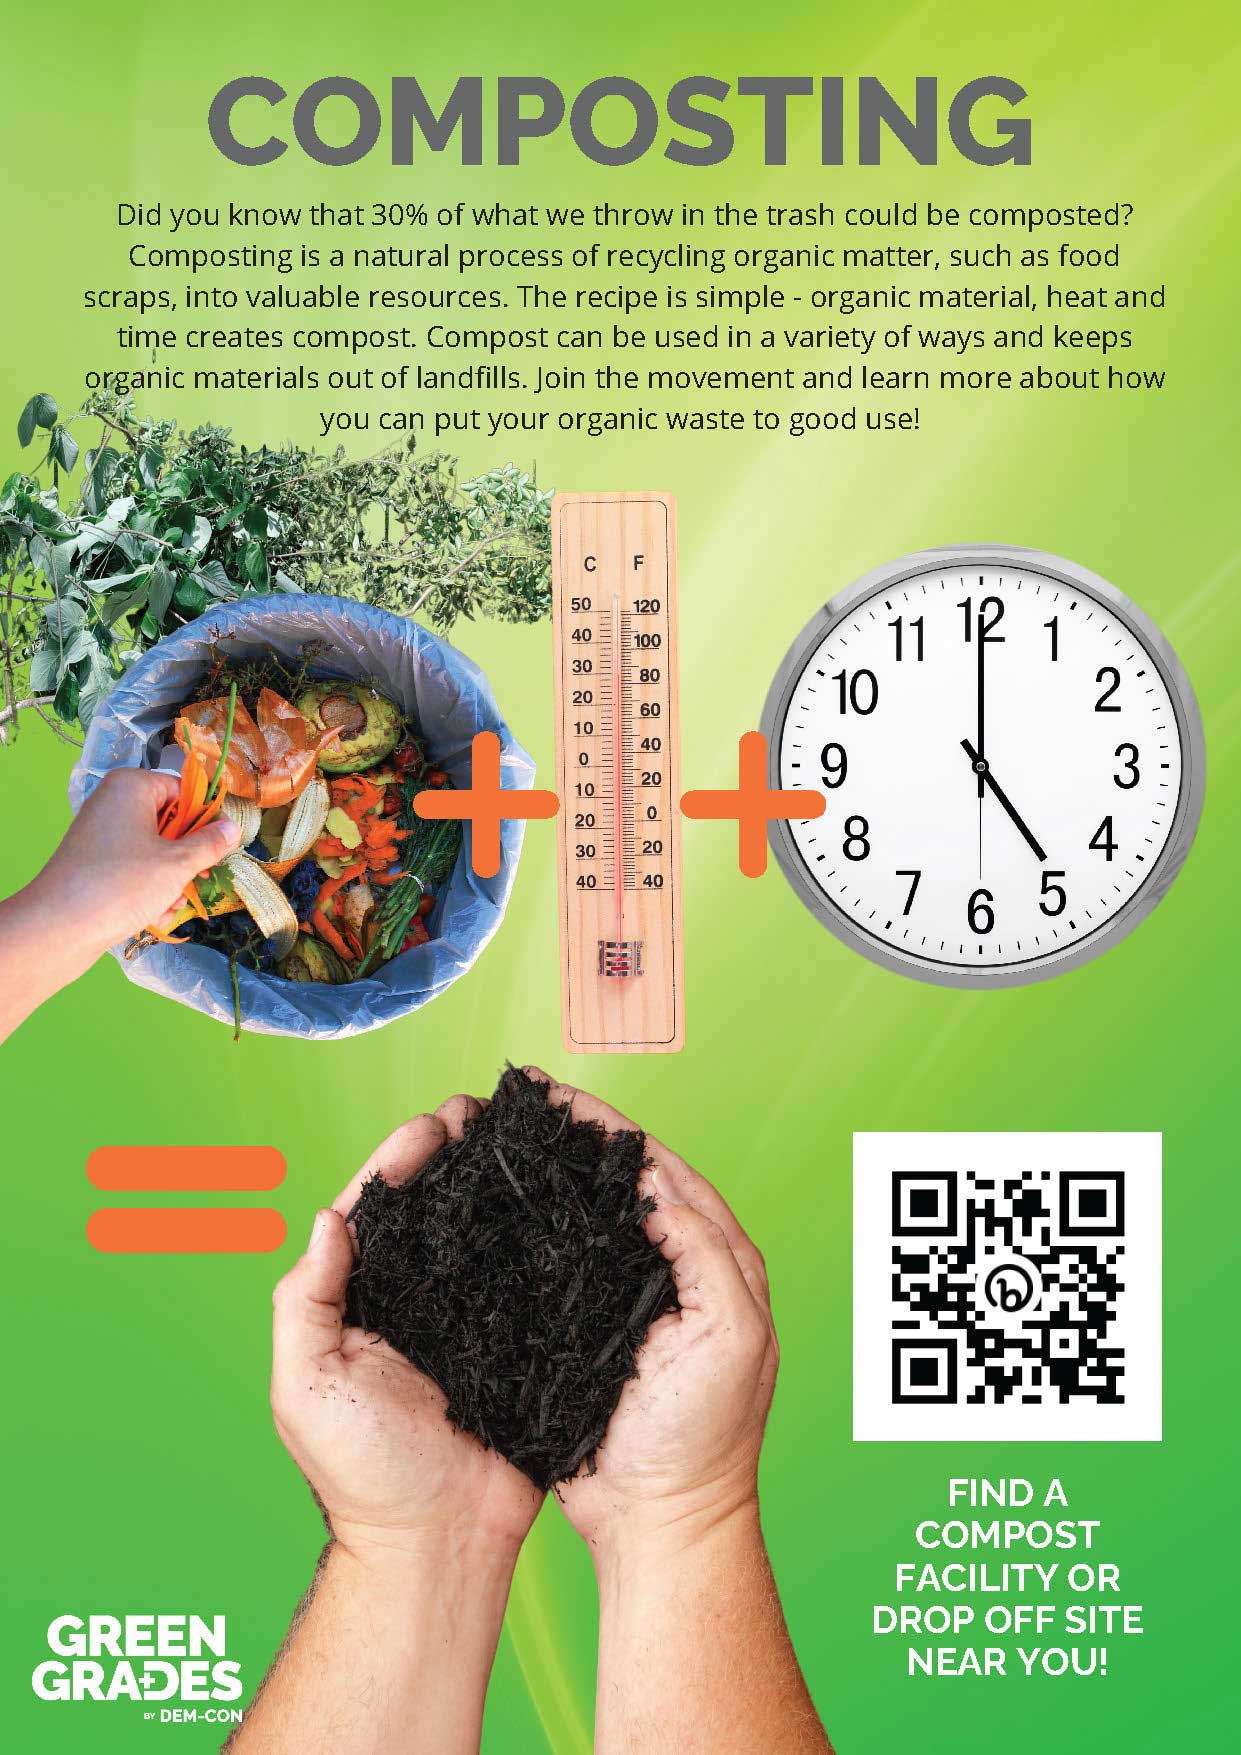 A flyer on composting and its benefits